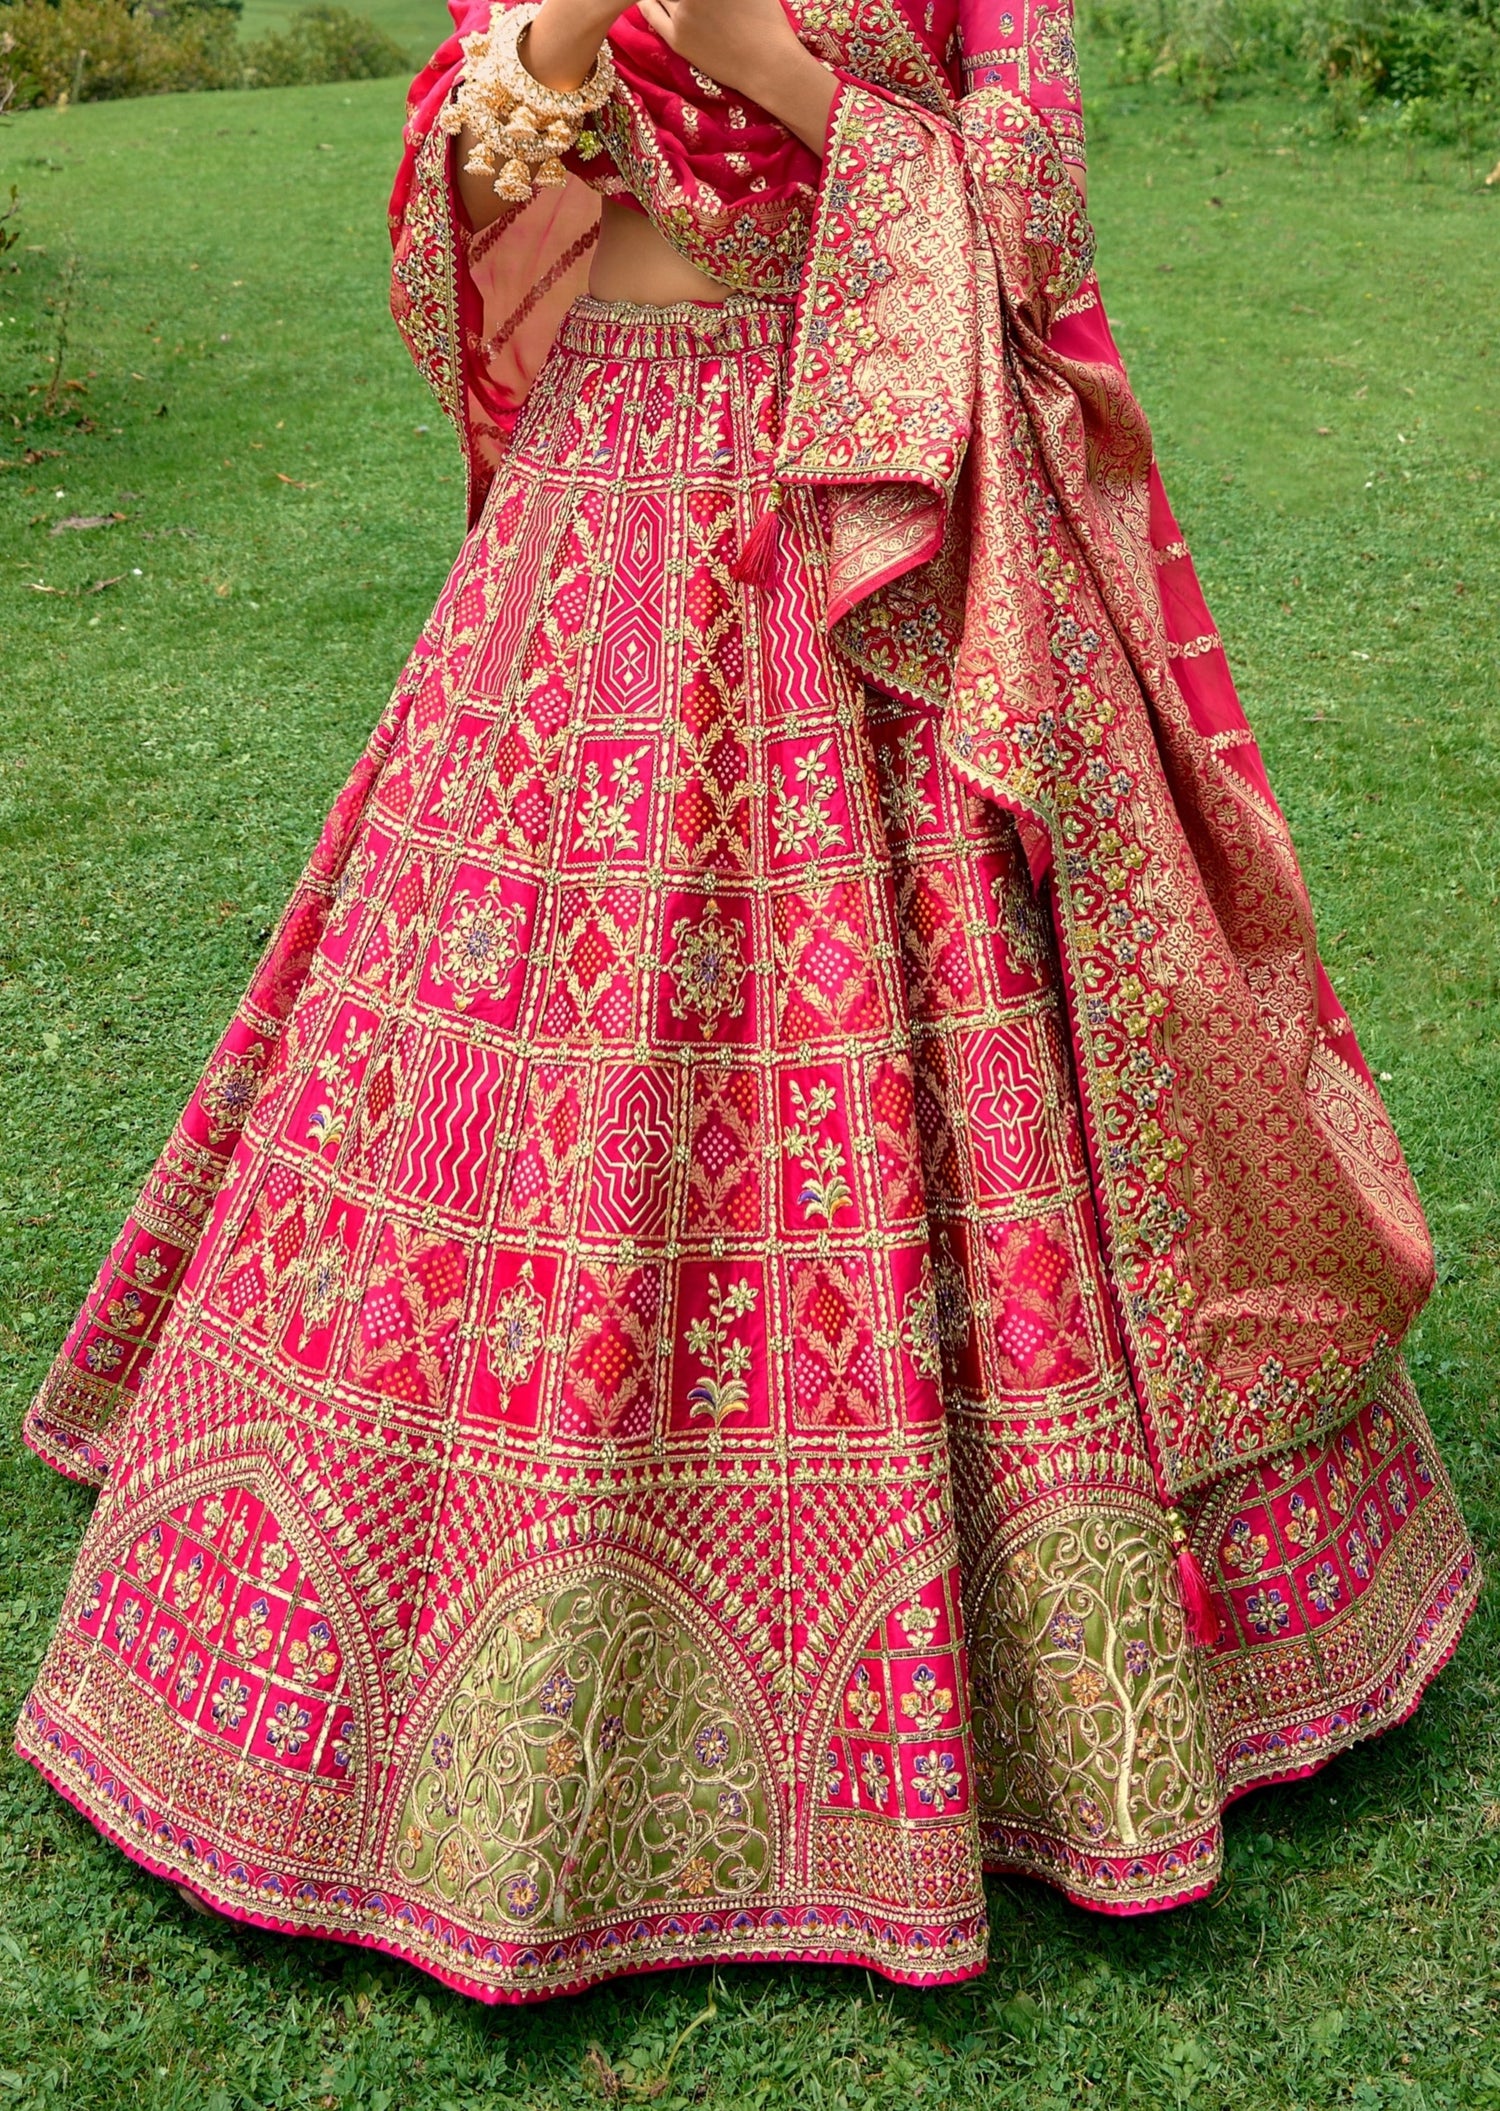 Ghagra Choli - Everything You Need to Know About this Indian Outfit – Raas